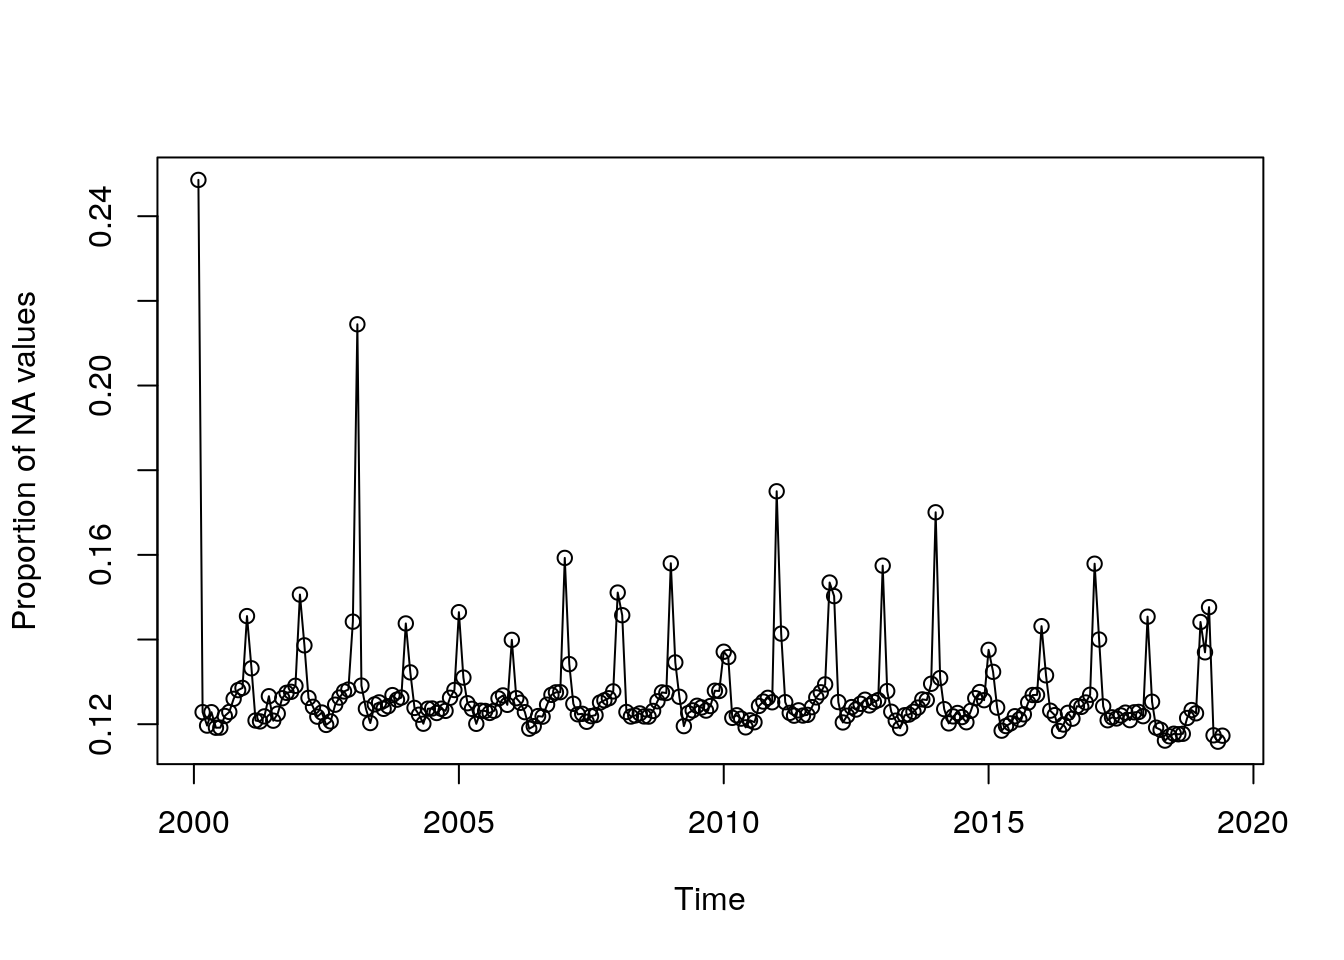 Proportion of `NA` values over time